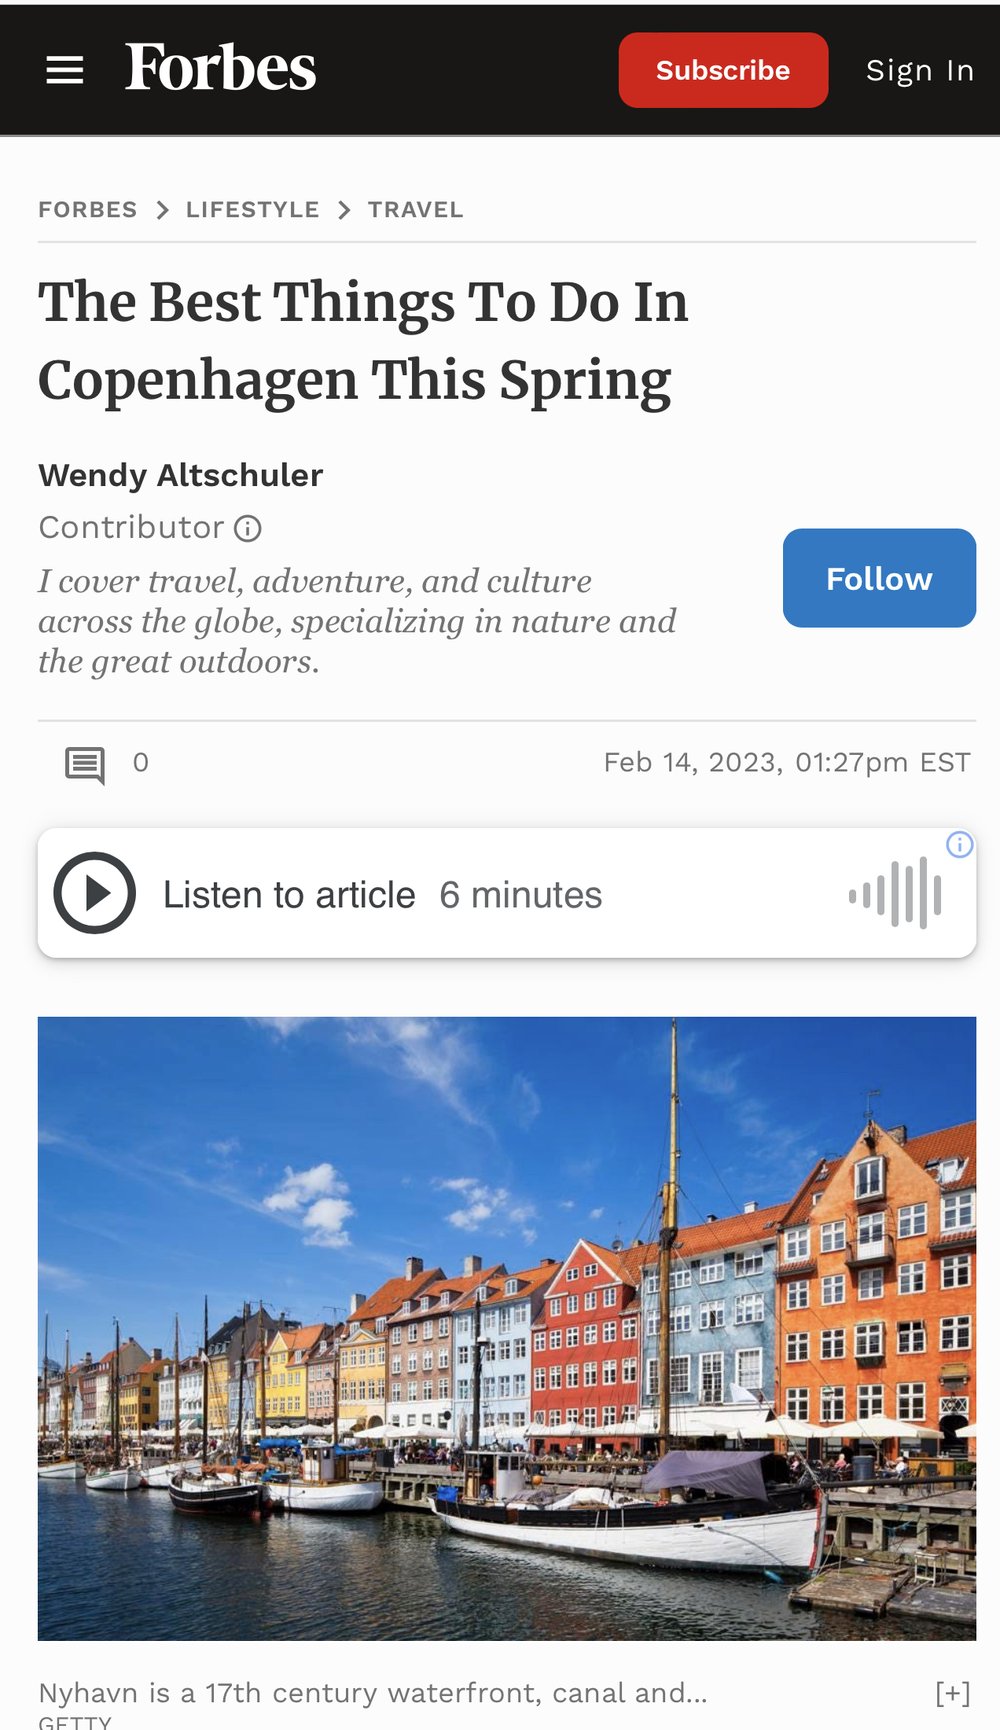 The Best Things To Do In Copenhagen This Spring